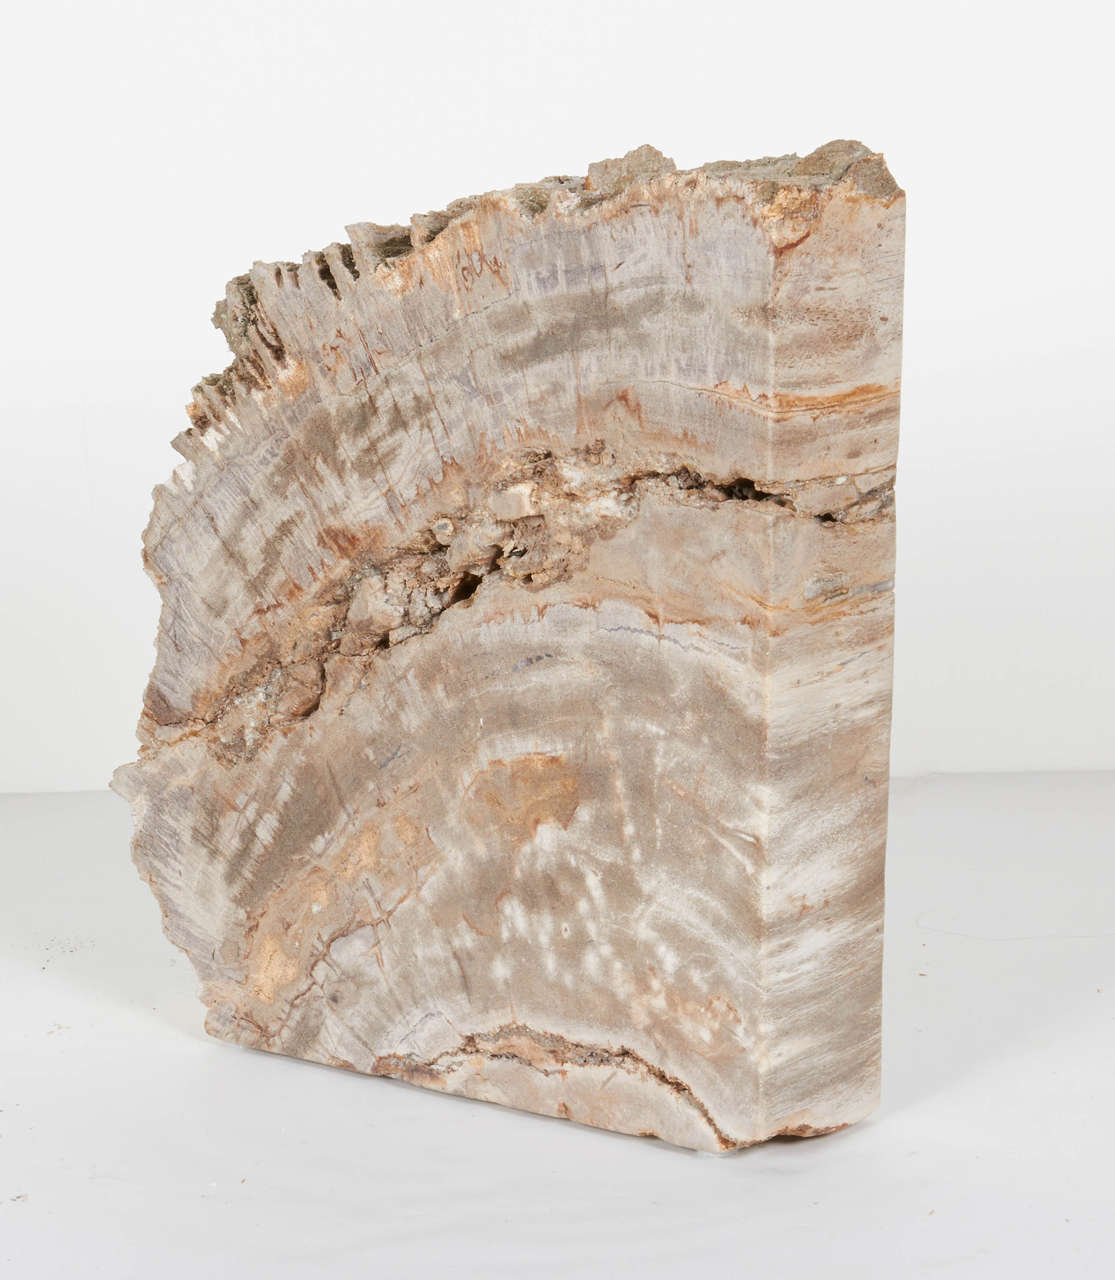 Indonesian Pair of Remarkable Petrified Wood Bookends with Natural Jagged Edges